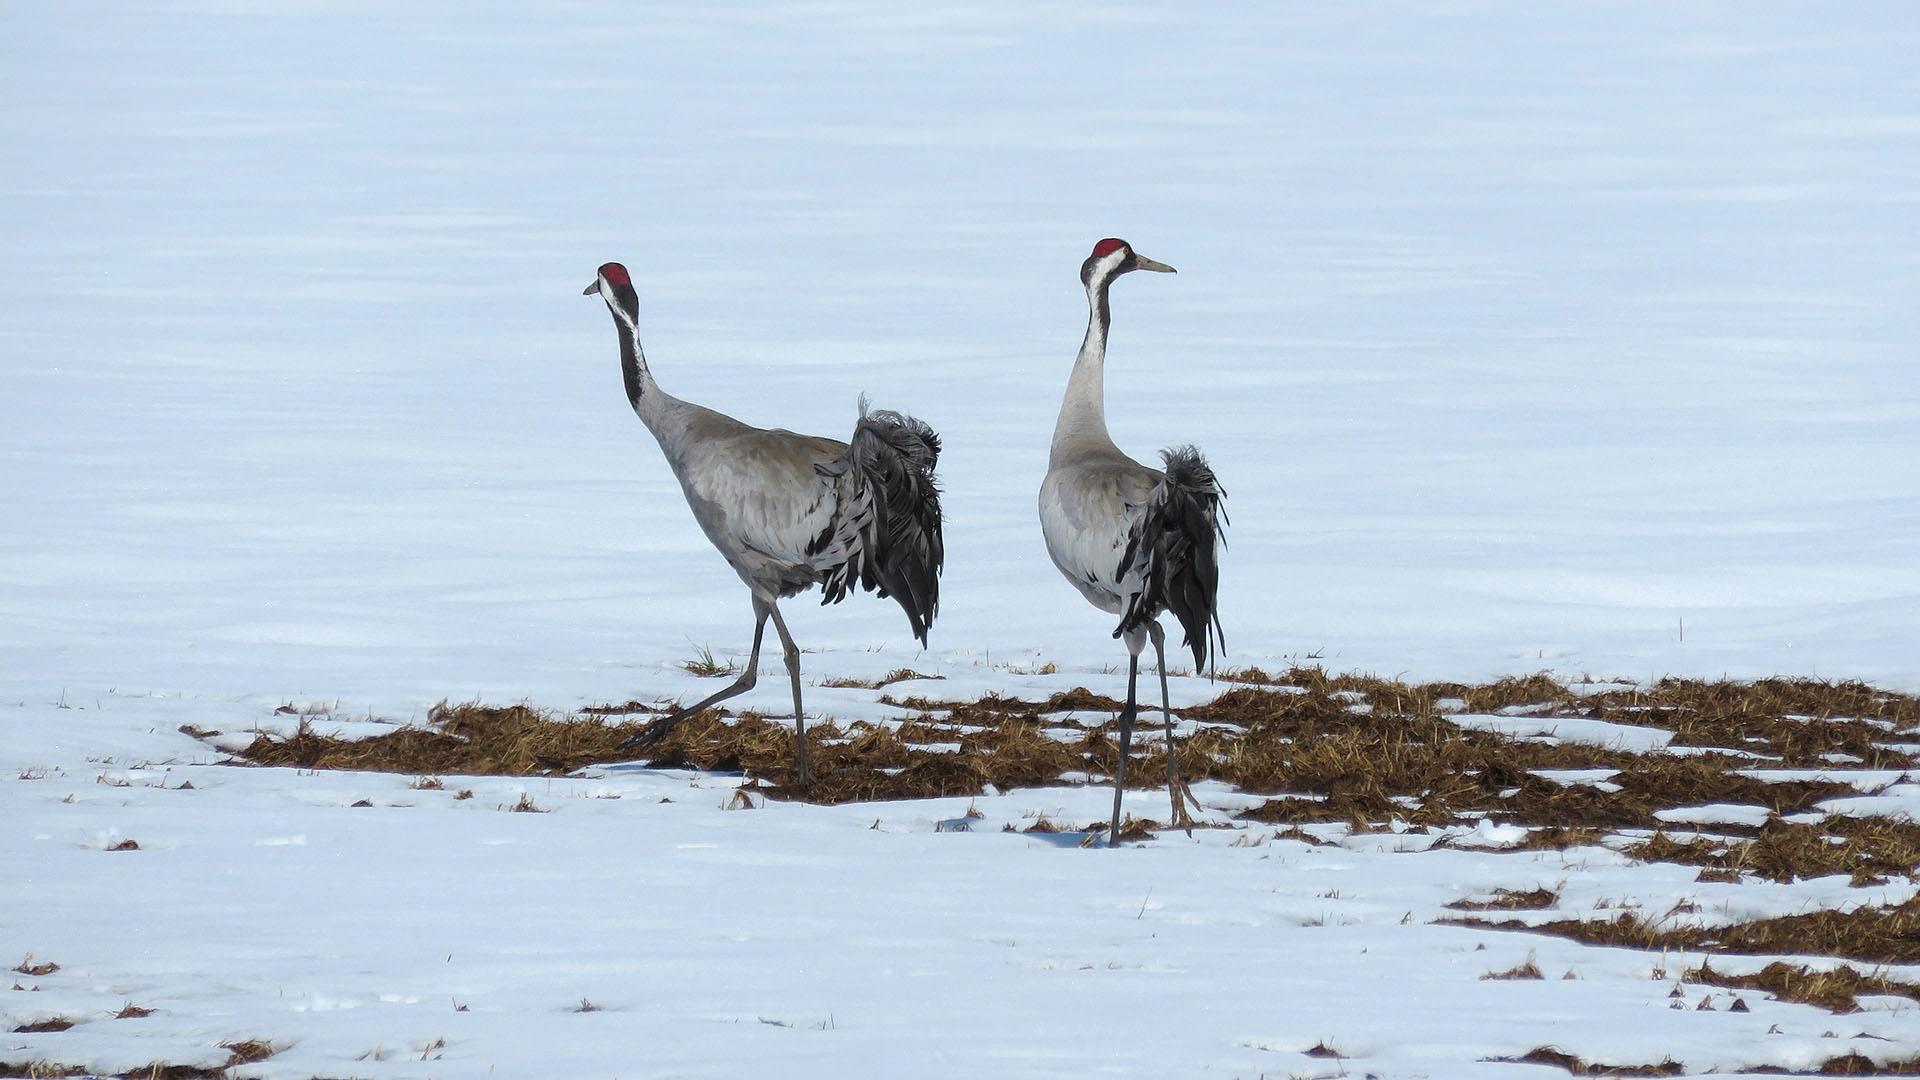 A pair of Common Cranes on snow-covered ground